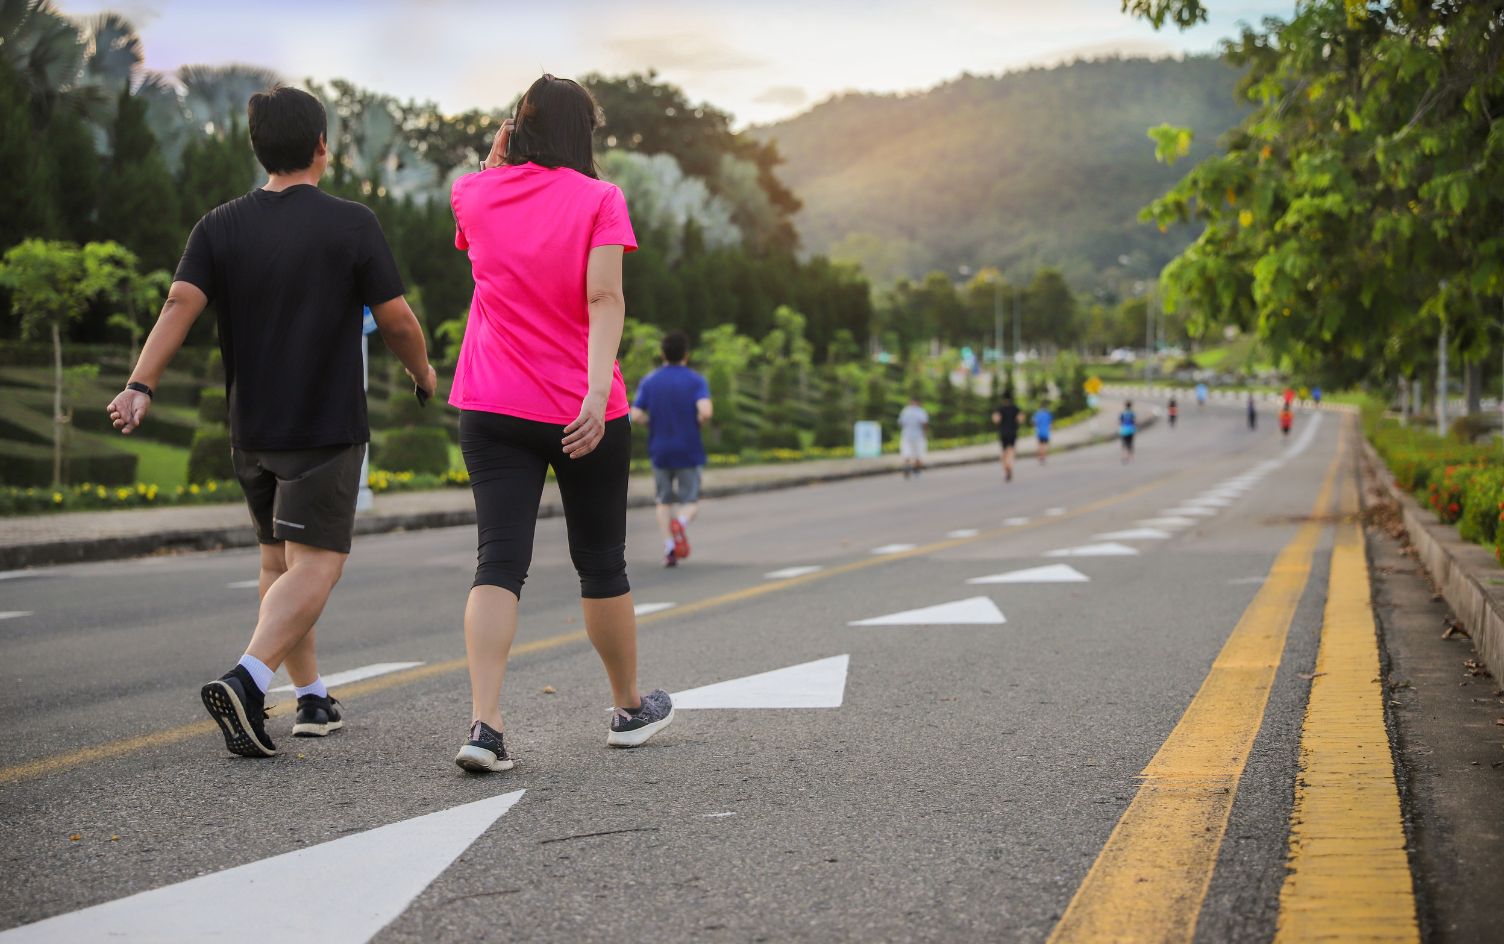 Walking Can Help You Live Longer (Even if You’ve Never Exercised Before)